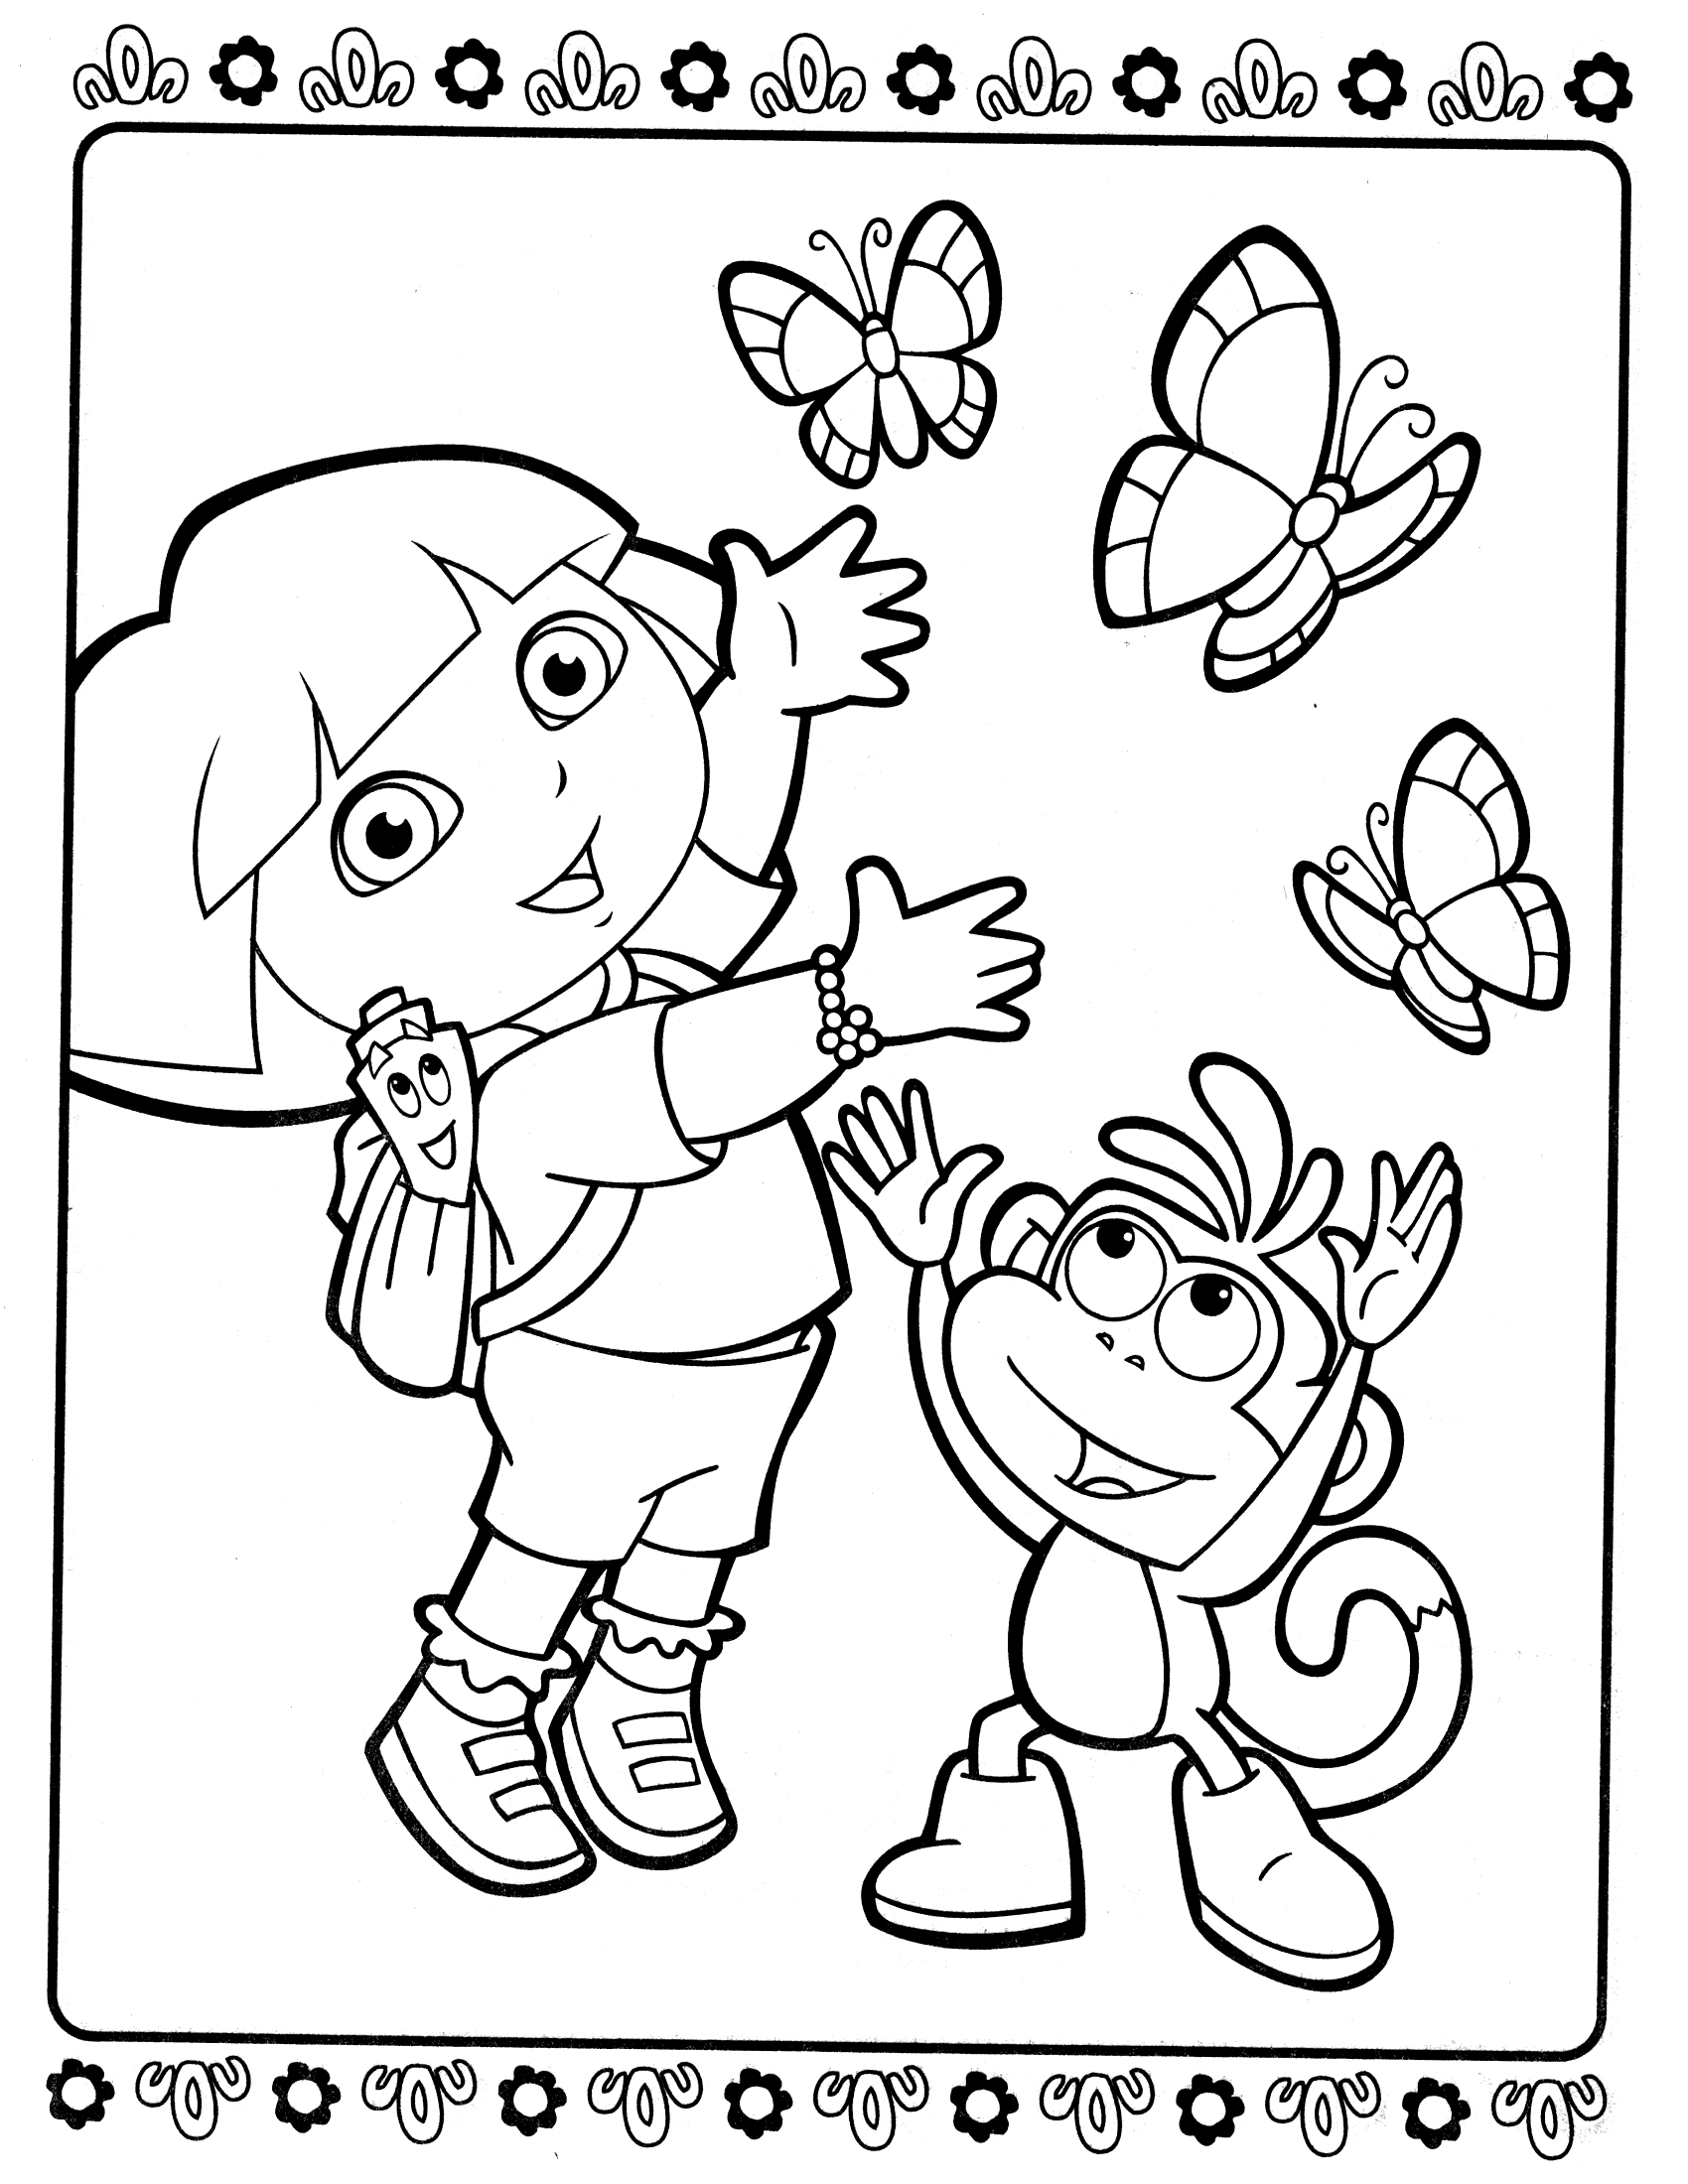 Drawing Dora the Explorer #29738 (Cartoons) – Printable coloring pages